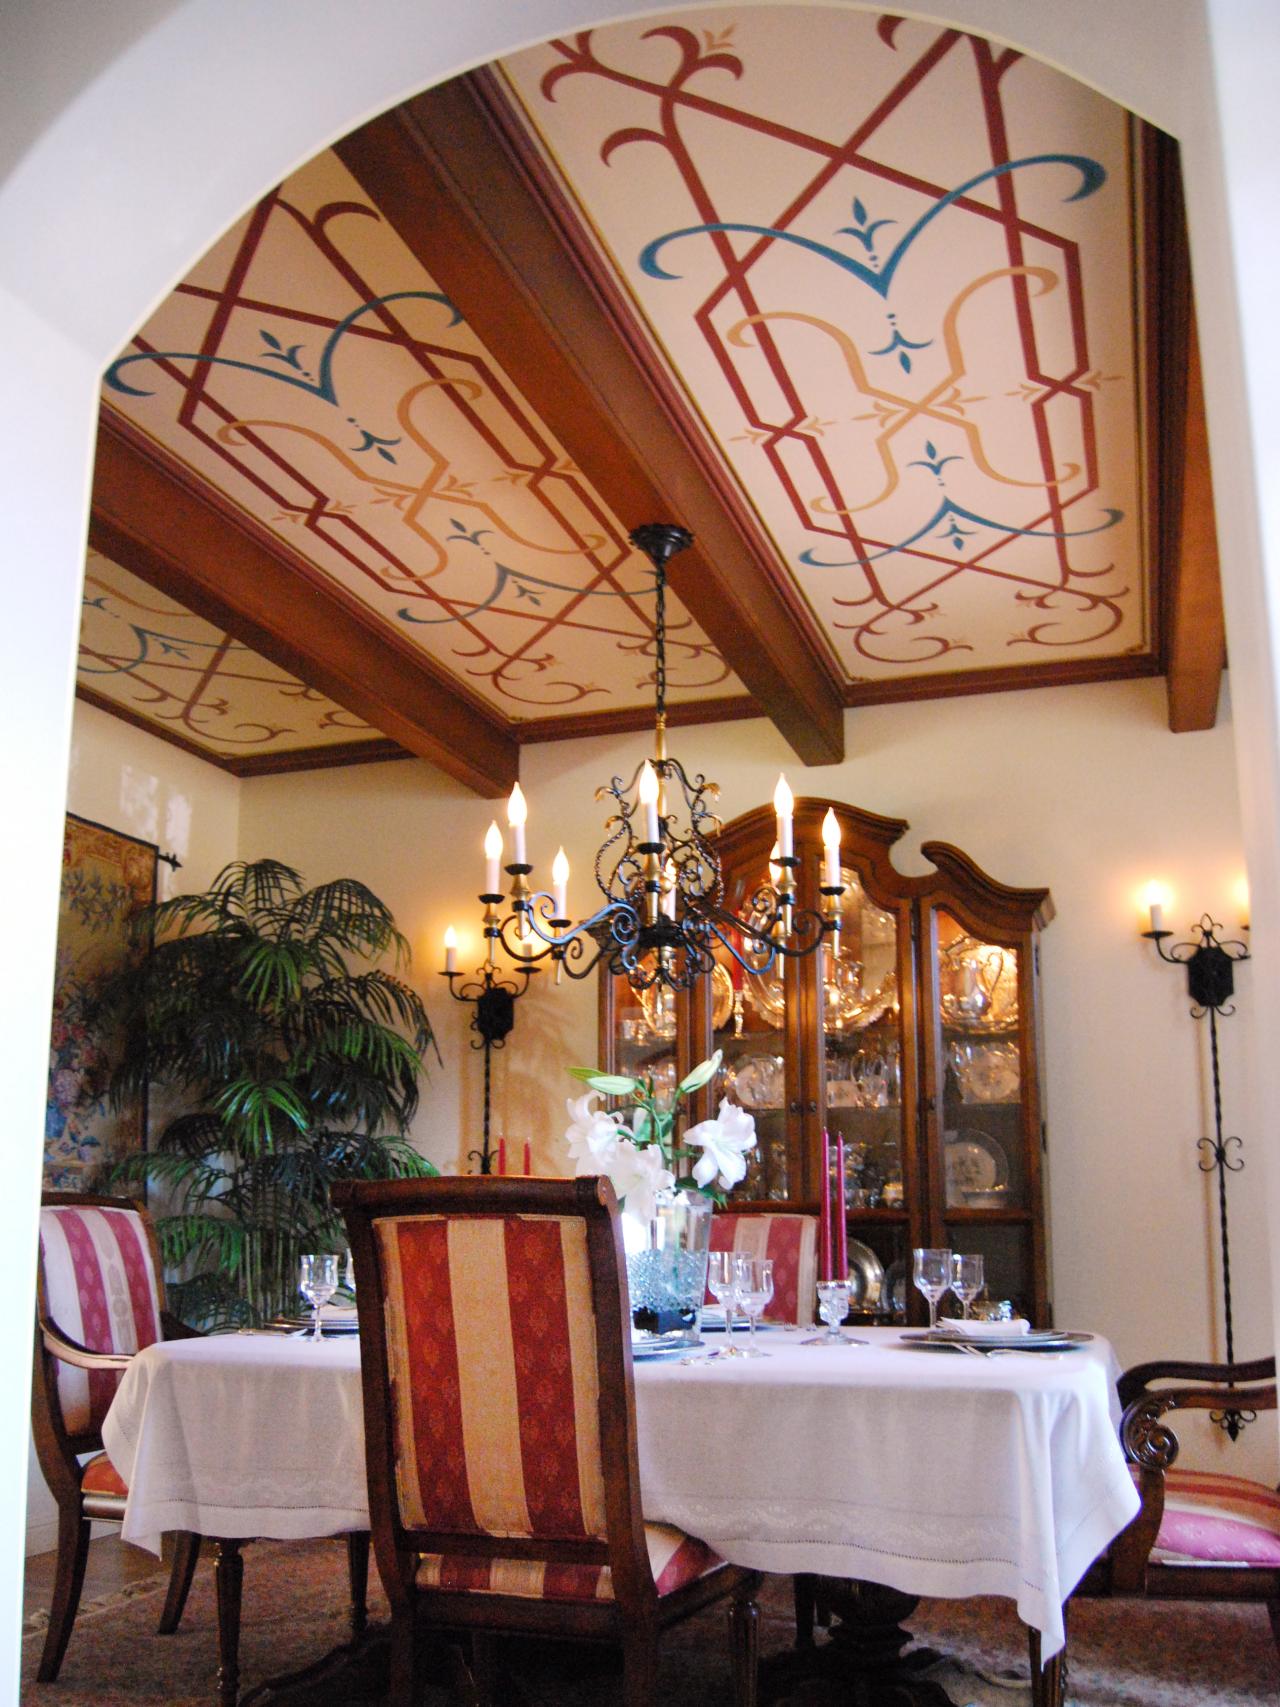 Mediterranean-Dining-Room-With-Decorated-Ceiling